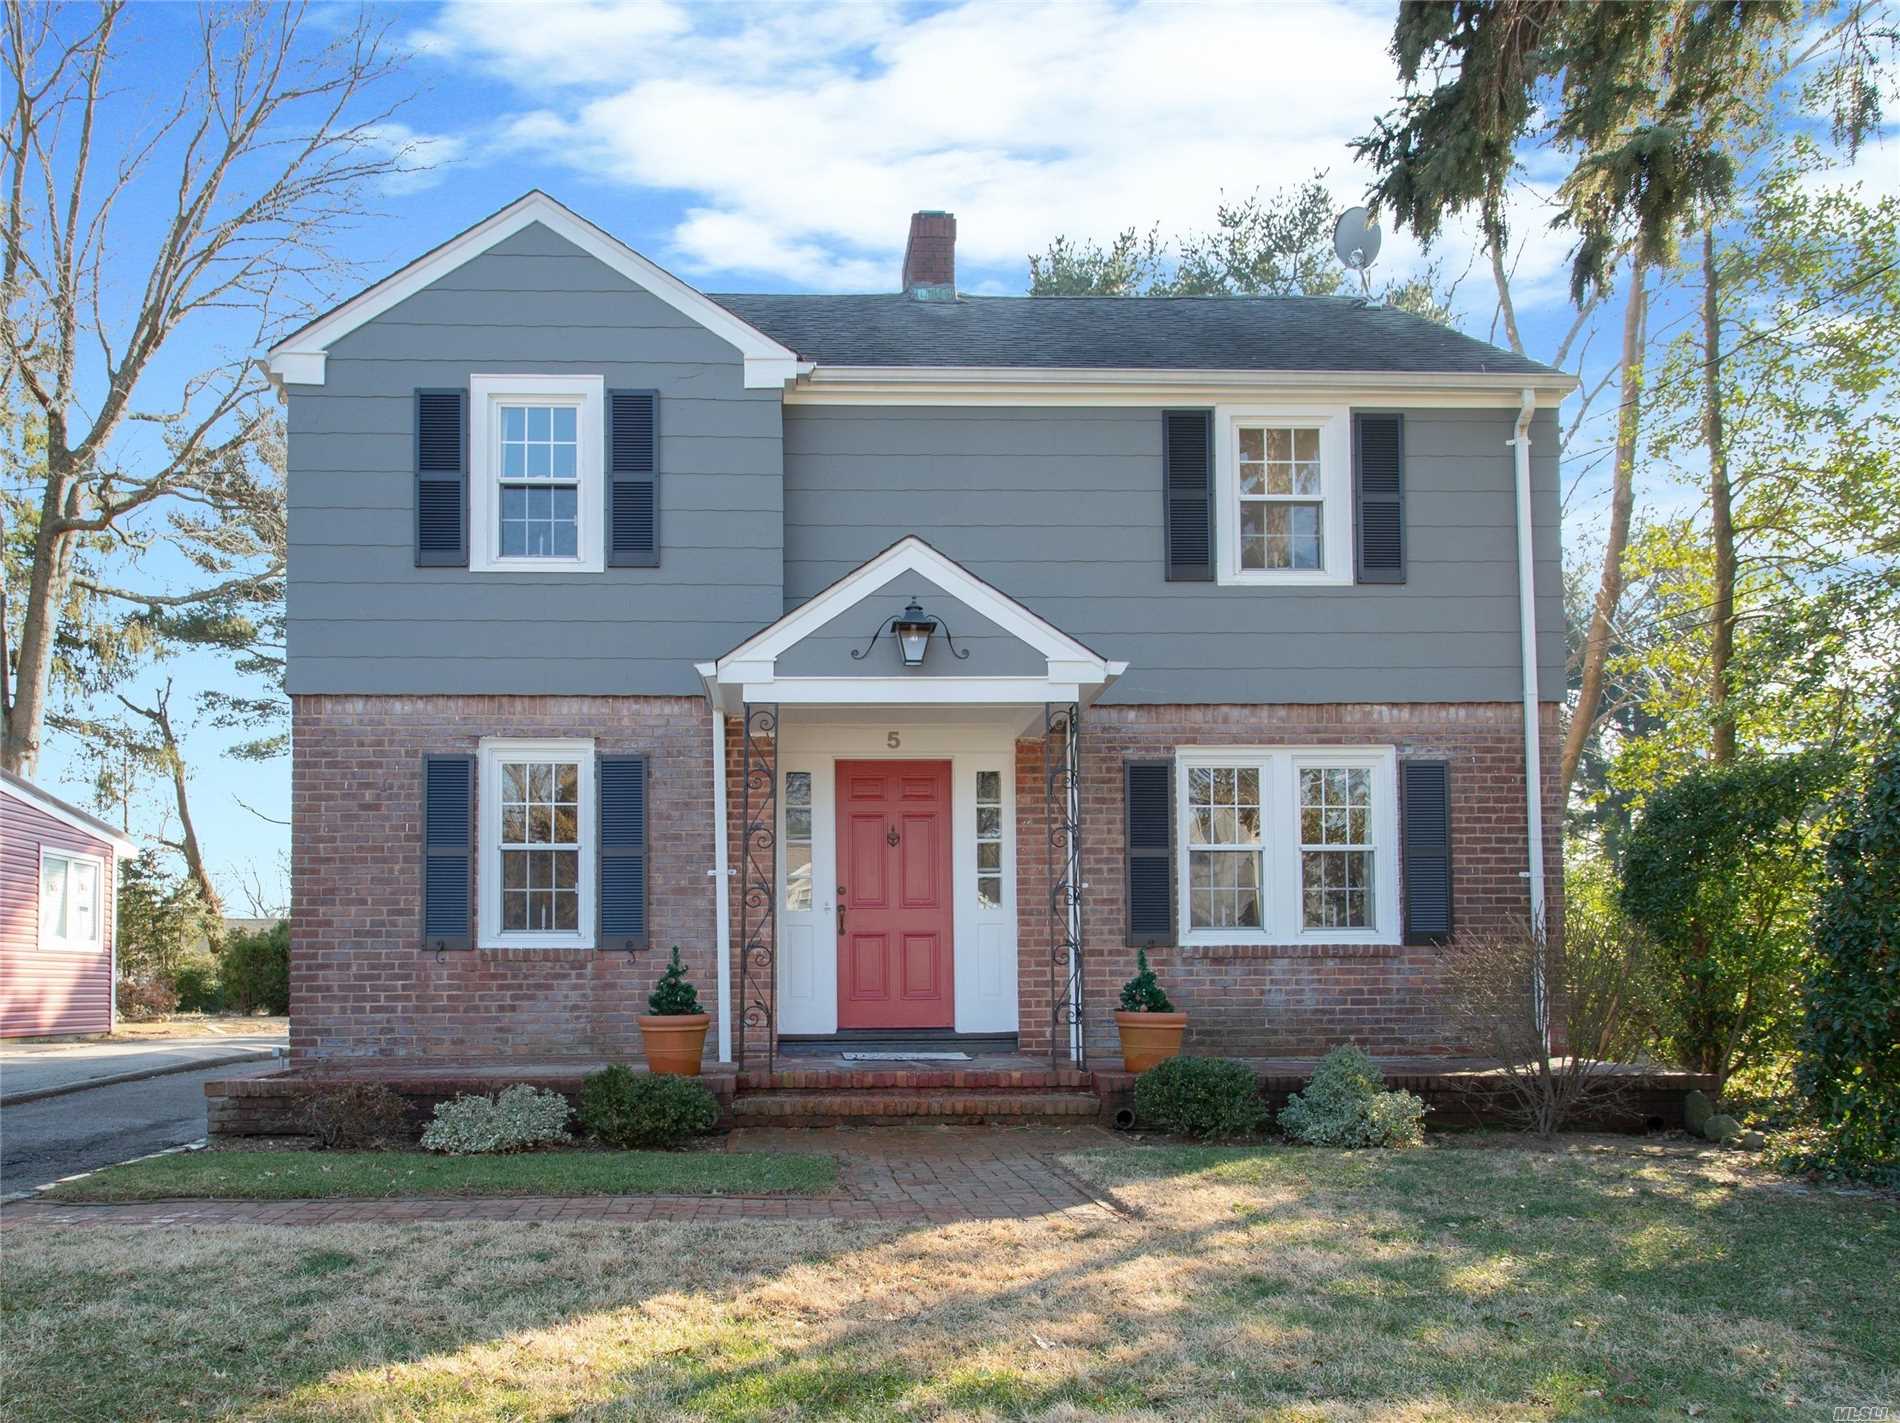 Beautifully Updated Colonial On Lovely Cul-De-Sac Boasts Newly Installed Paver Patio, Sun Drenched Kitchen & Family Room, As Well As A New Bathroom Upstairs. New S/S Appliances And Gorgeous Hardwood Floors Make Moving Into Your New A Snap!